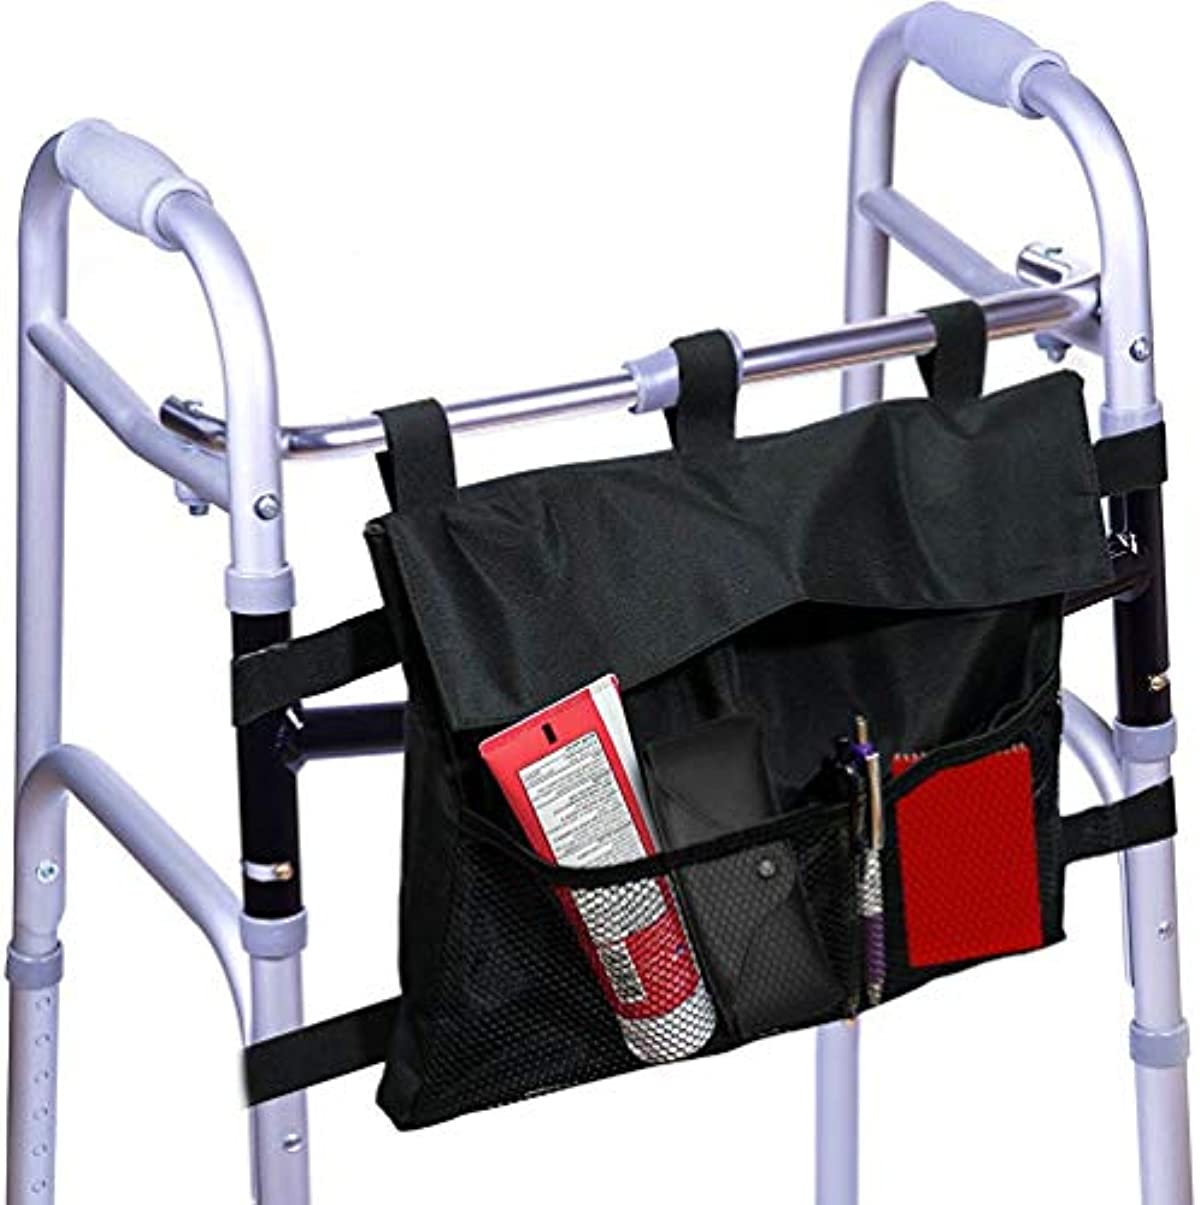 Walker and Rollator Bag - Water Resistant Accessory Storage Pouch Attachment for Folding or Standard - Carry Tote Basket Style Bag fits Most Styles Designed for Elderly, Seniors, and Disabled